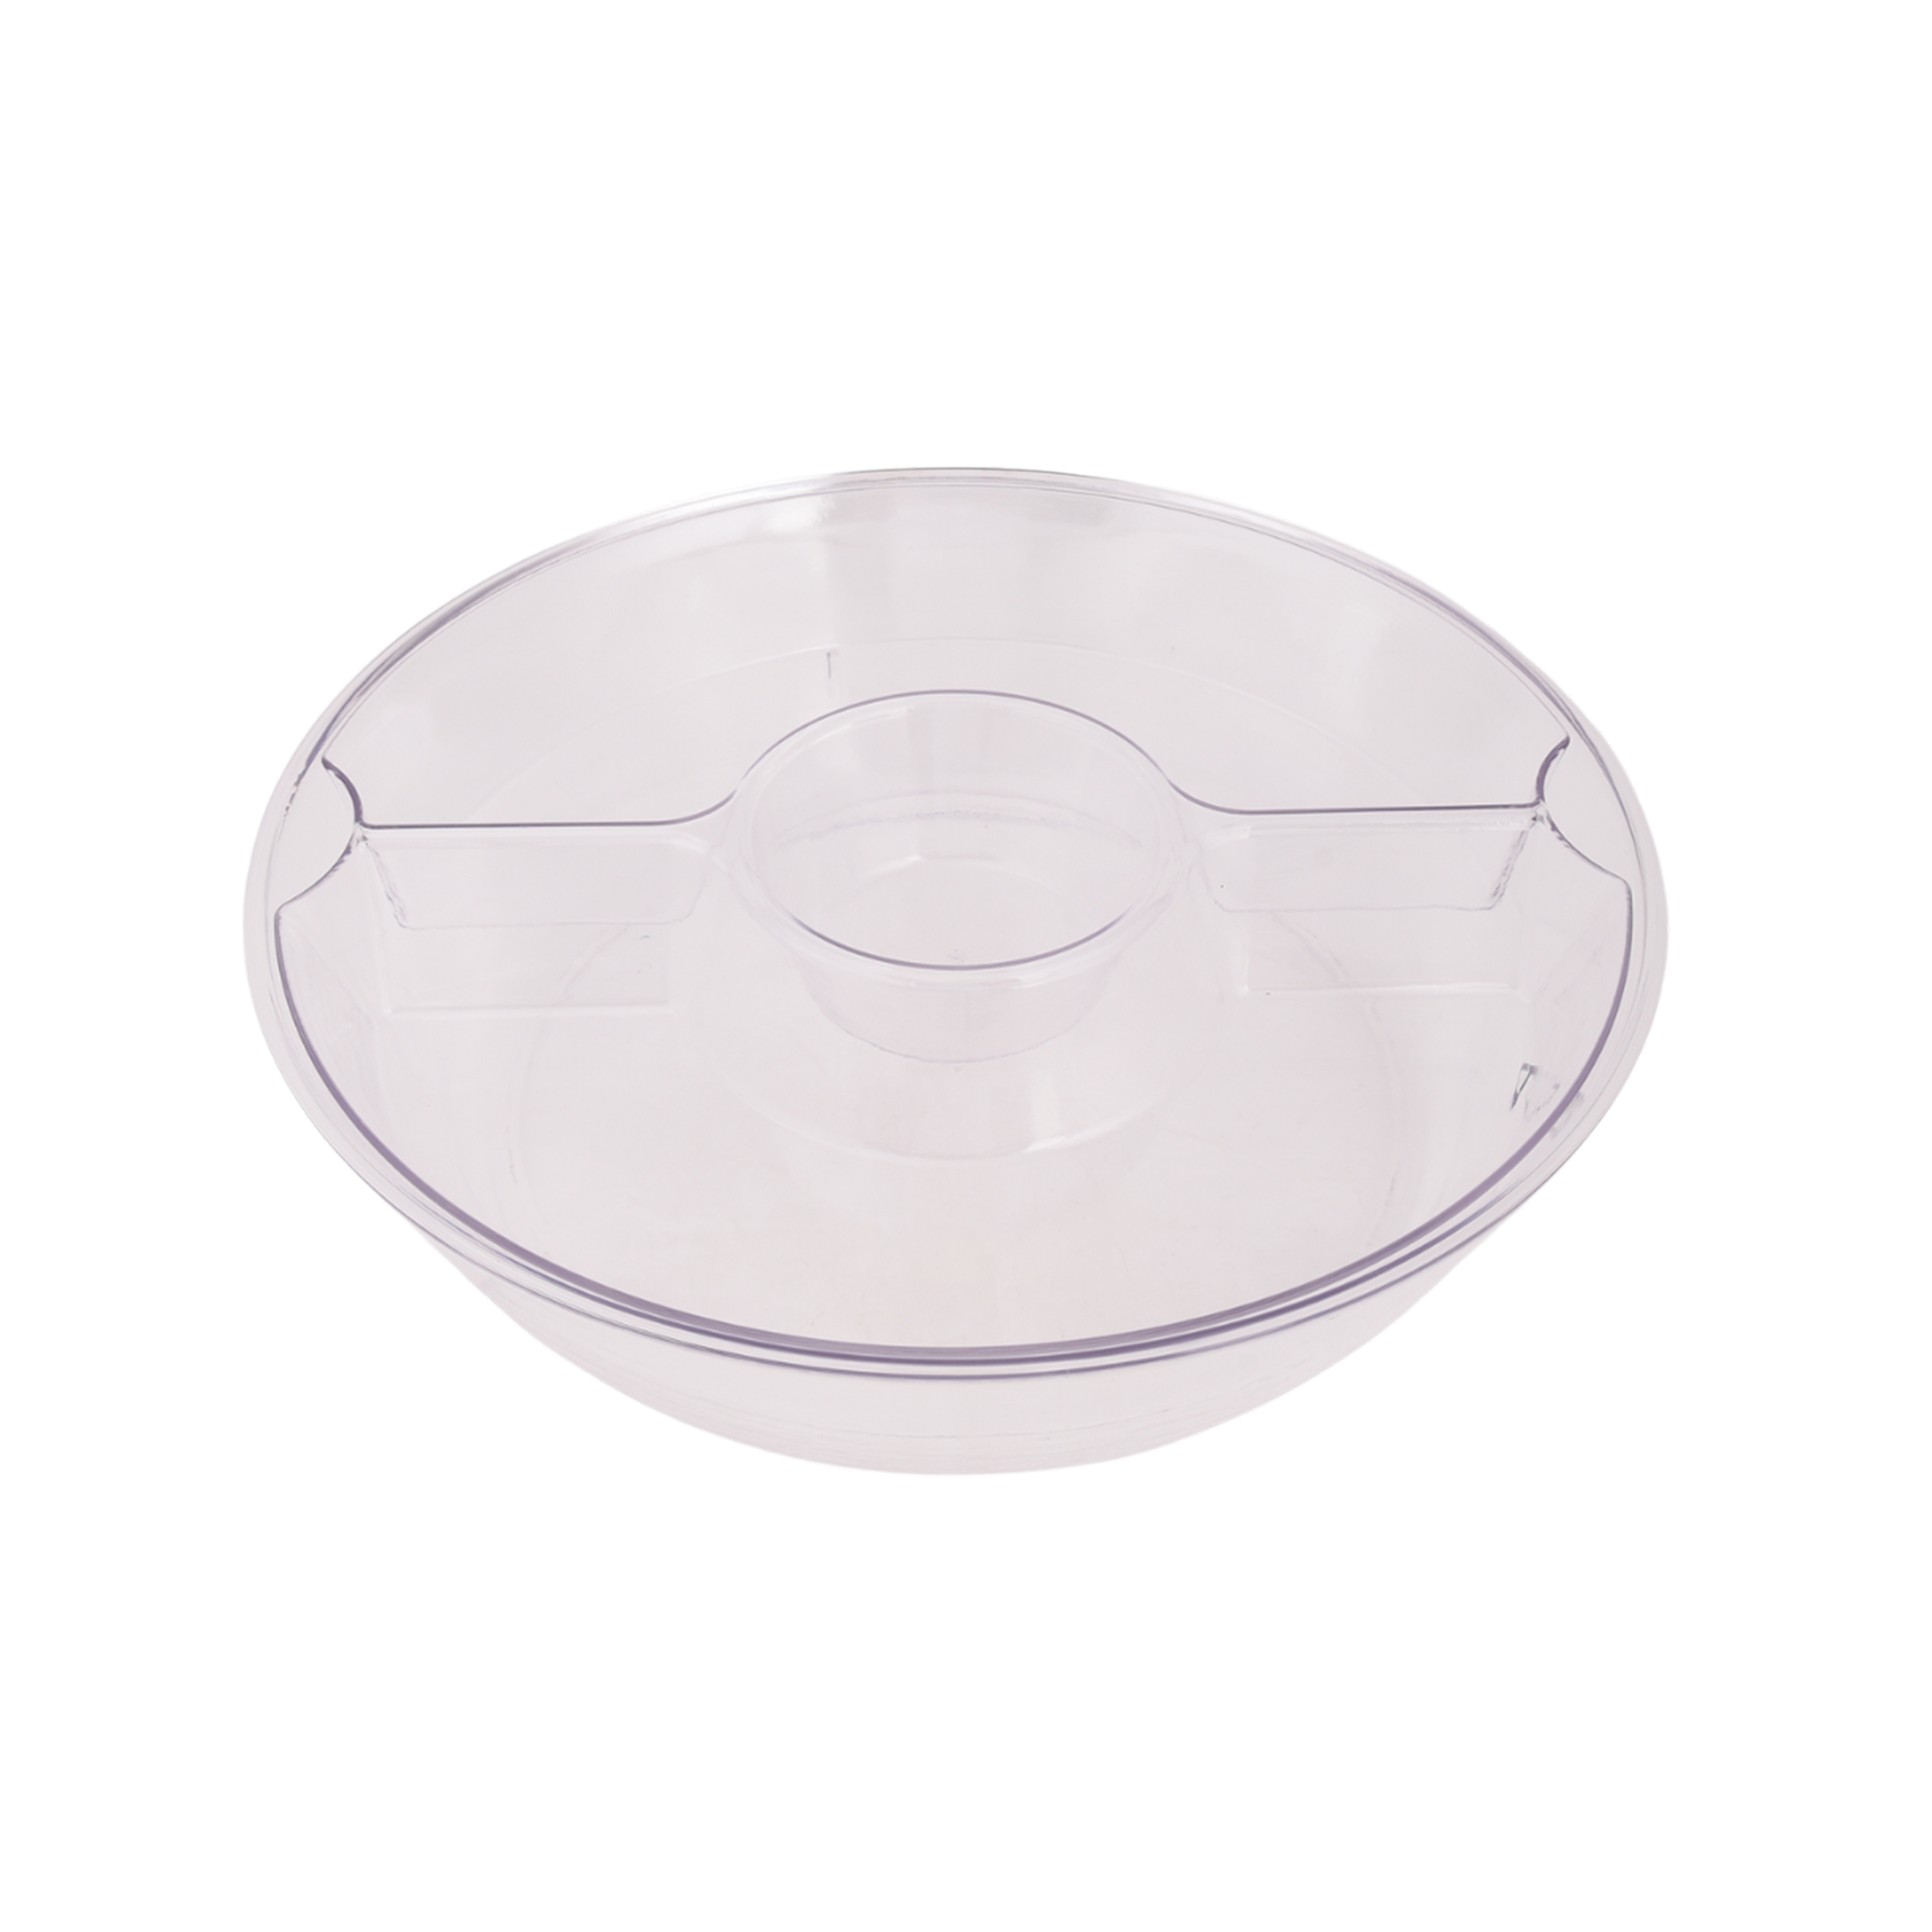 Mainstays Acrylic Appetizer On Ice Serving Tray with Lid, Clear - image 1 of 8